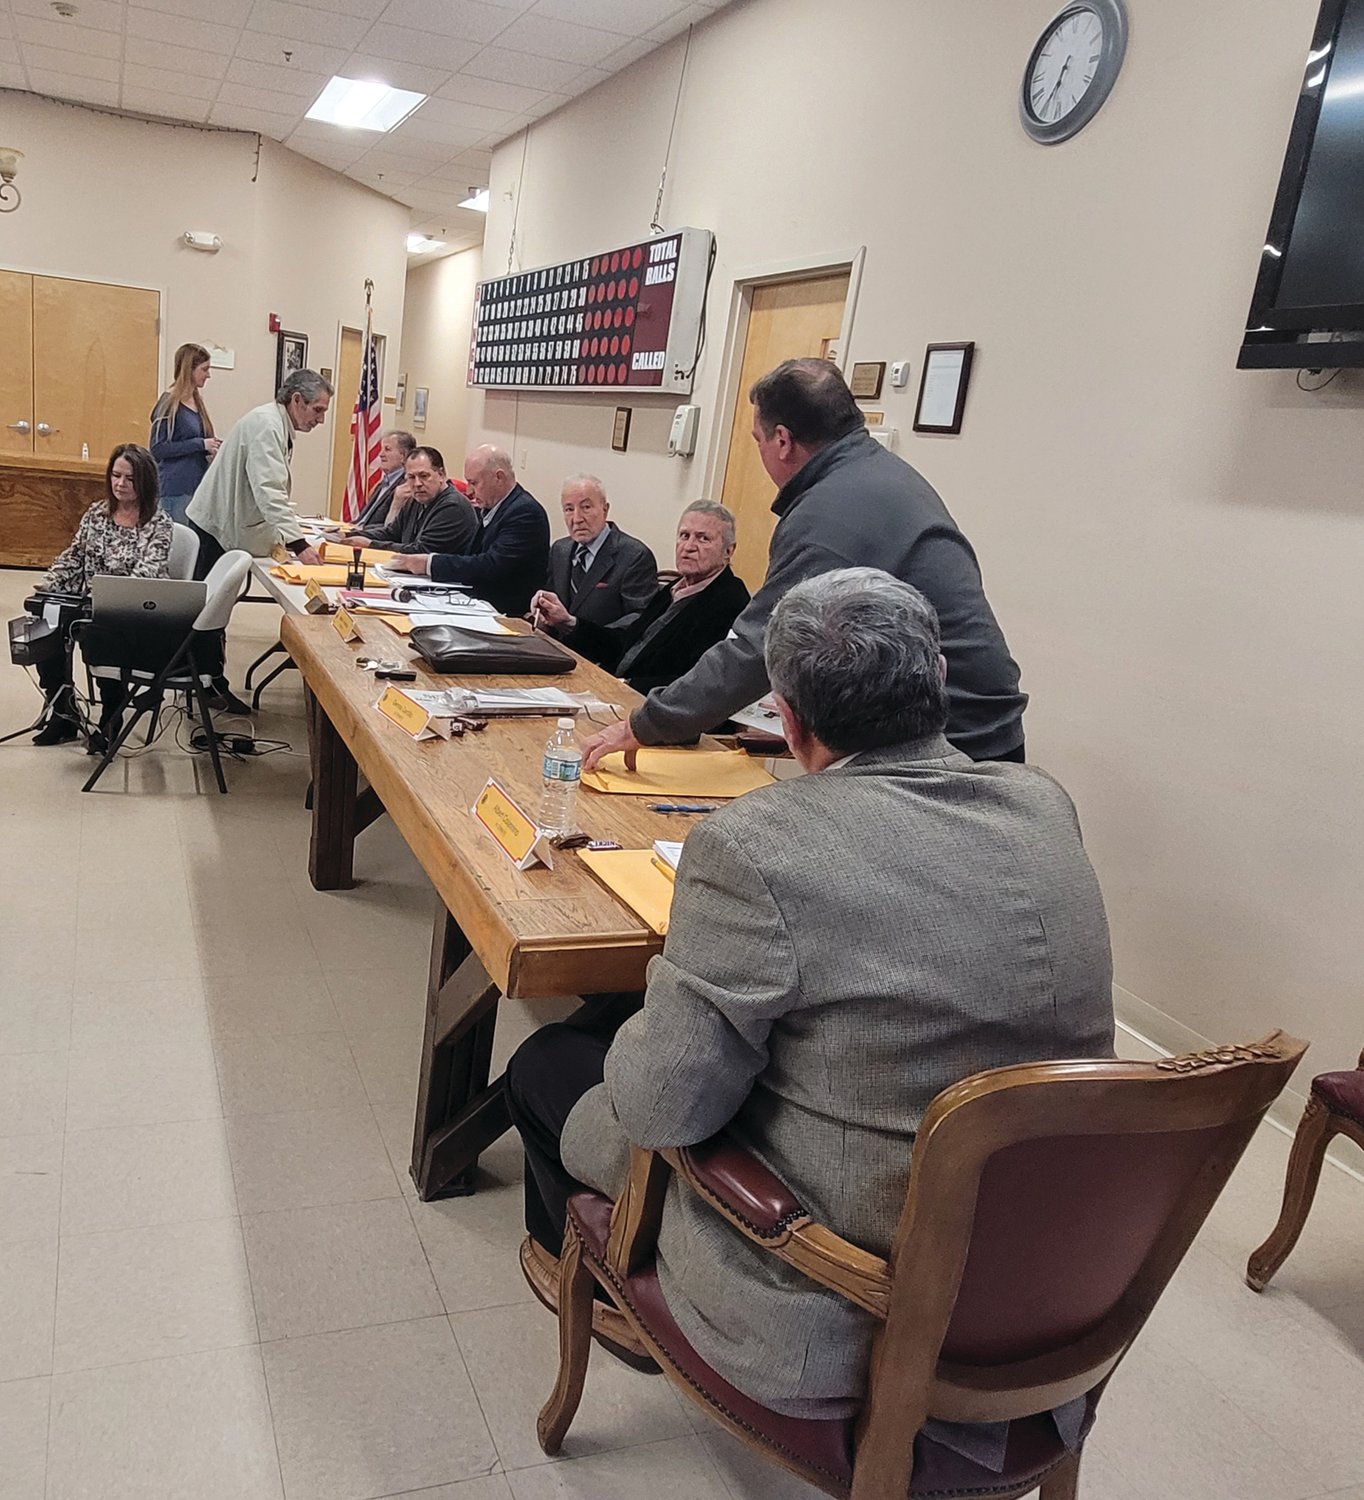 SPEAK SOFTLY: The audience started Thursday’s meeting with audible hostility. The Zoning Board spoke from a long table at one end of the Senior Center’s main activity room. They spoke quietly, and there were no microphones.